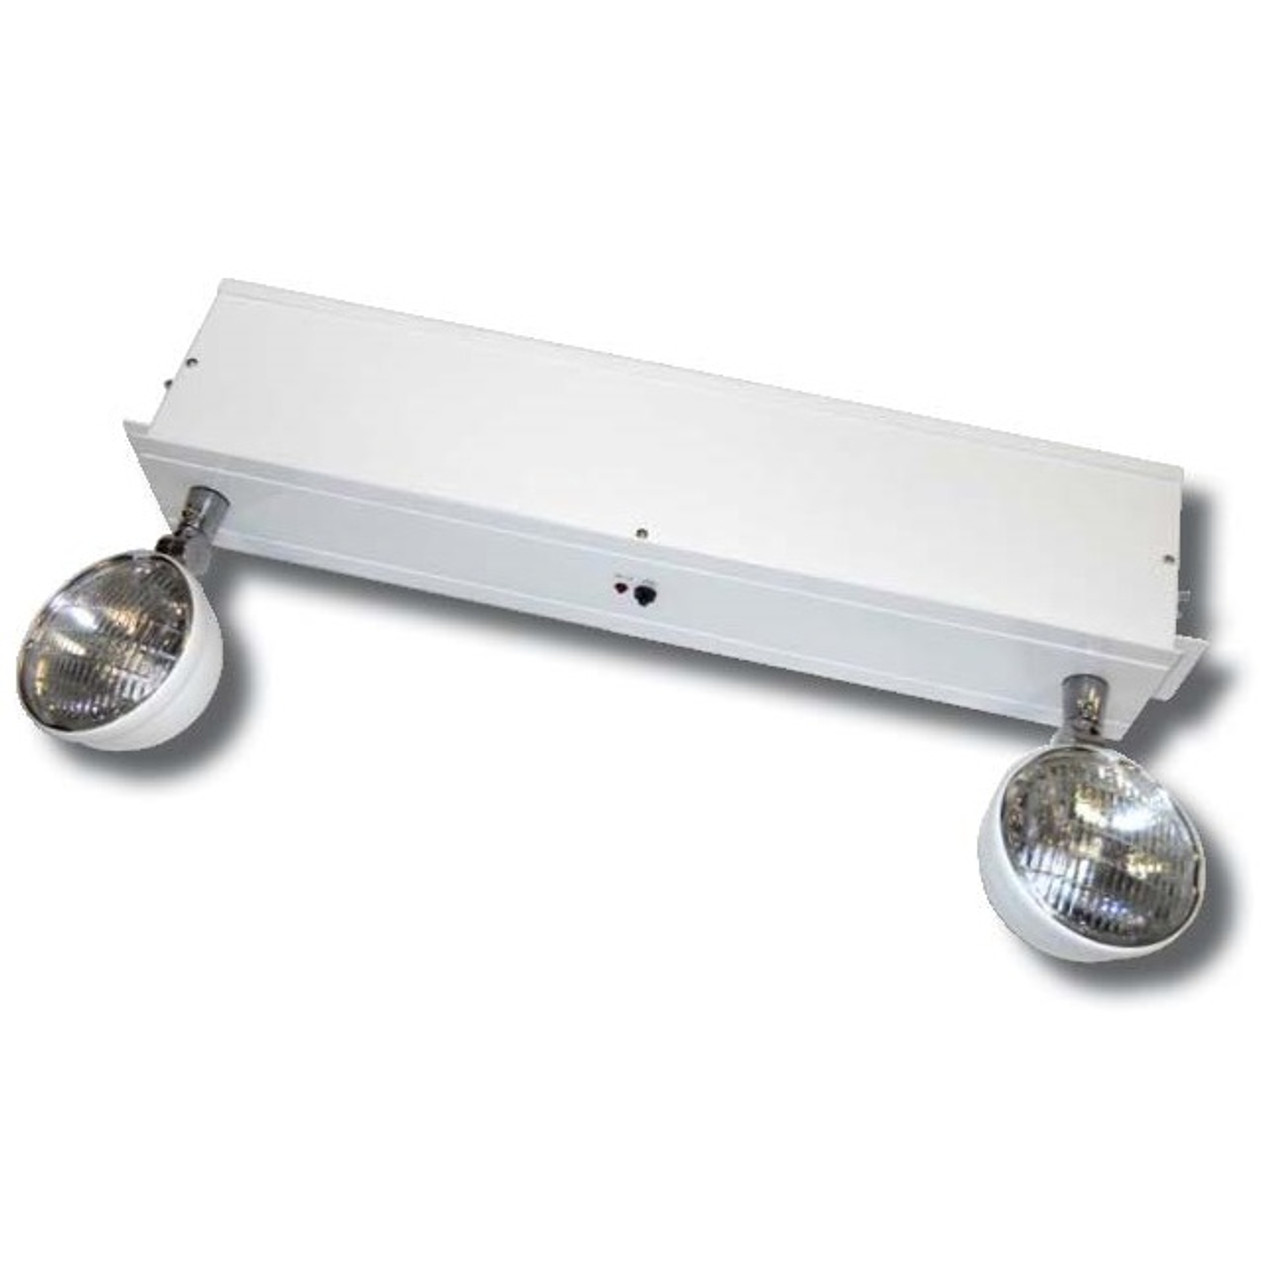 Two, 6V/12V 12.0 watt adjustable bi-pin halogen lamp heads.
Long lasting, efficient, wedge base incandescent or bi-pin halogen lamps.
High performance chrome-plated metallized reflector and glass lens for optimal light distribution
Adjustable 6V or 12V lamp heads provide optimal center-to-center spacing.
Dual 120/277 voltage standard.
Charge rate/power “ON” LED indicator light and push-to-test switch for mandated code compliance testing.
LVD (low voltage disconnect) prevents battery from deep discharge.
6V sealed lead acid, maintenance-free, rechargeable battery.
Remote capacity of 26.0 watt standard on 50.0 watt models.
Internal solid-state transfer switch automatically connects the internal battery to LED board for minimum 90-minute emergency illumination.
Fully automatic solid-state, two rate charger initiates battery charging to recharge a discharged battery in 24 hours.
Designed for use with T-bar grid ceilings.
Holes provided on enclosure for wire-suspension mount.